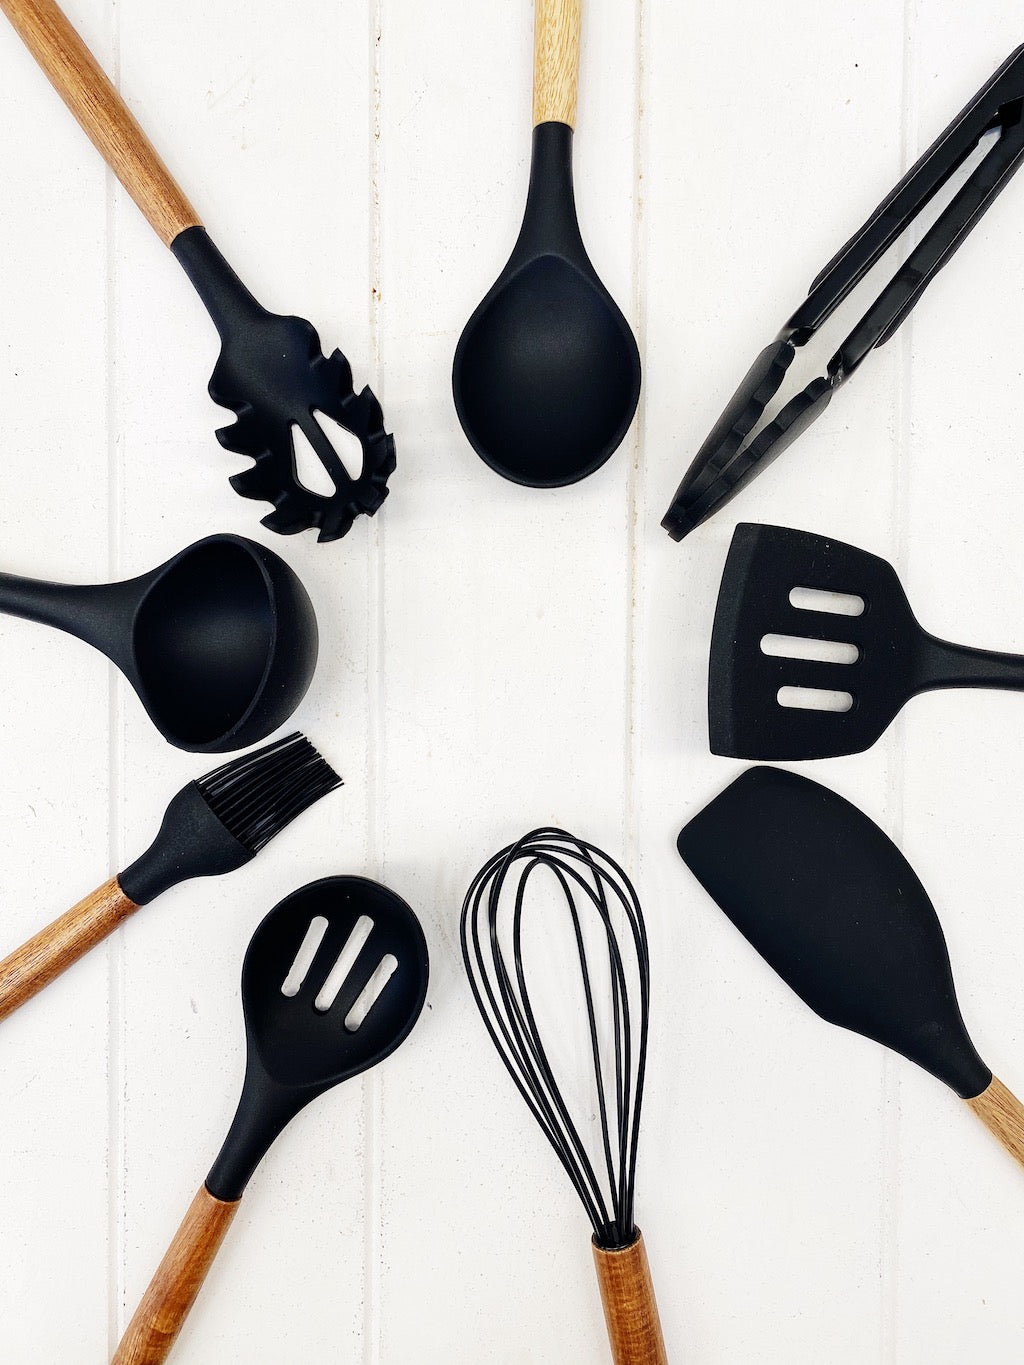 Bialetti St Clare Acacia Handle Silicone Whisk - Kitchen Utensils - black silicone head - heat resistant up to 500degrees - solid acacia handle |Bliss Gifts &amp; Homewares - Unit 8, 259 Princes Hwy Ulladulla - Shop Online &amp; In store - 0427795959, 44541523 - Australia wide shipping